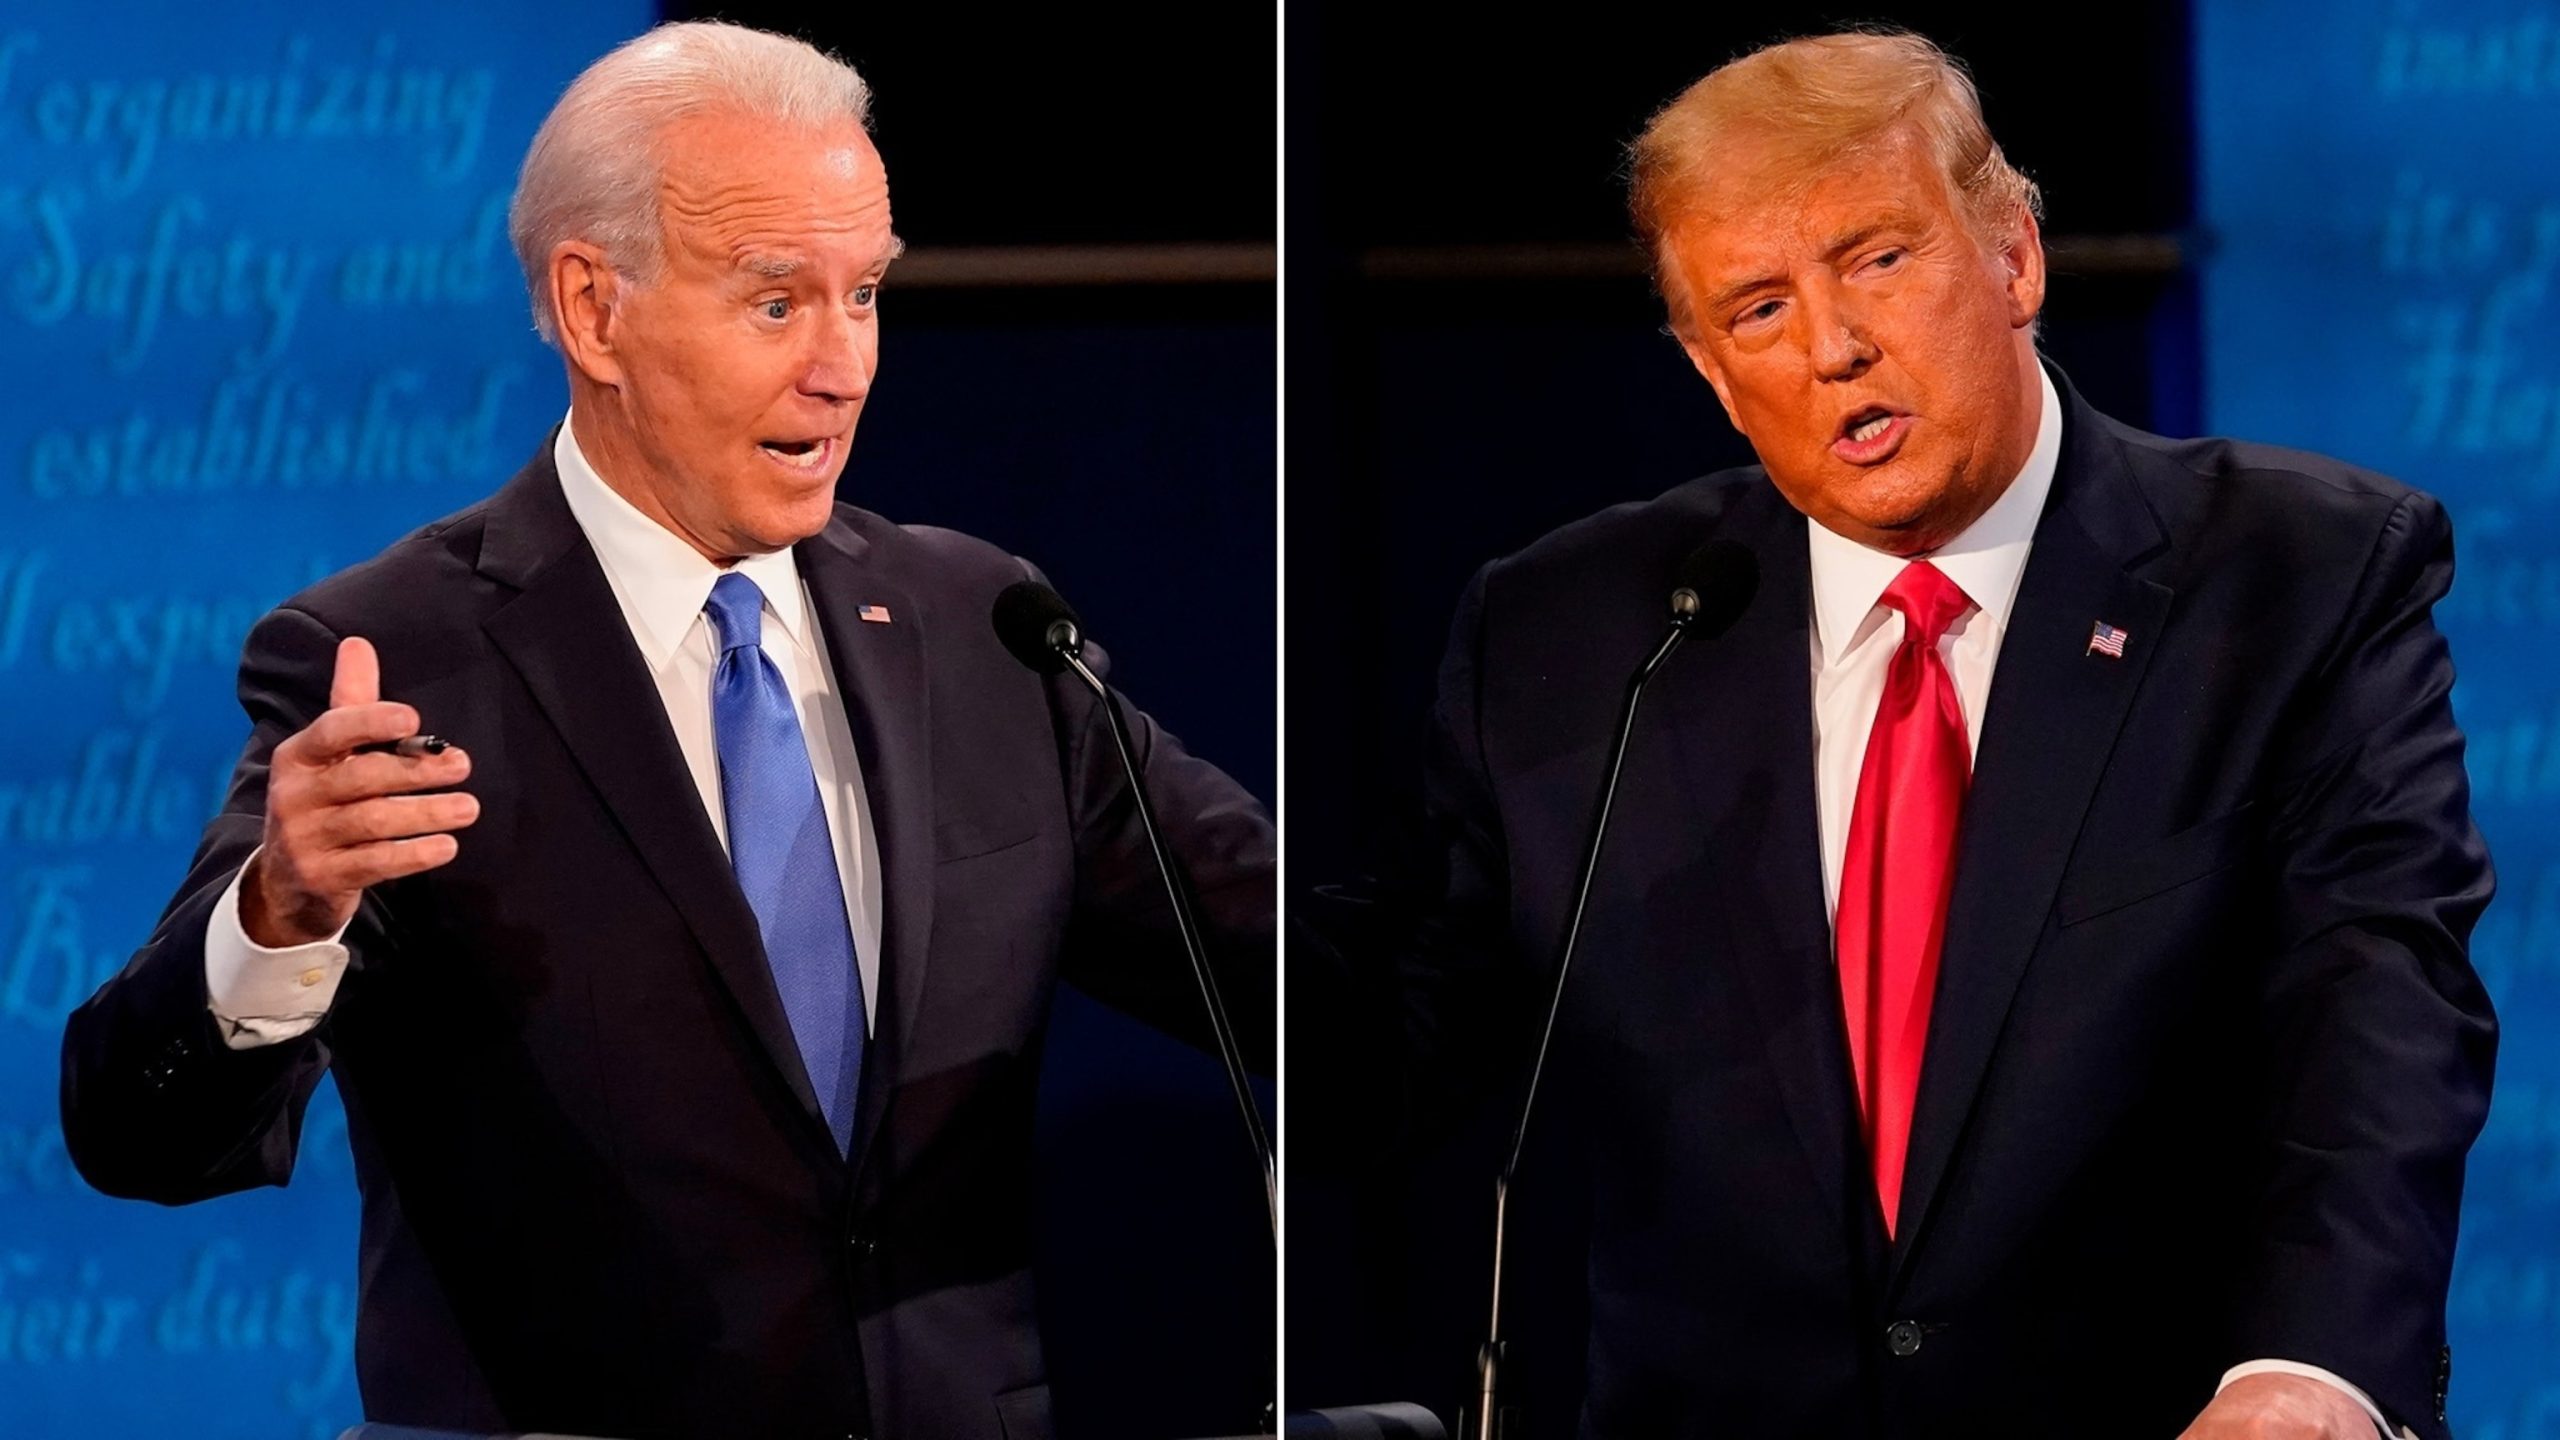 Opportunity for Change: Biden-Trump Debate Could Impact Close Presidential Race